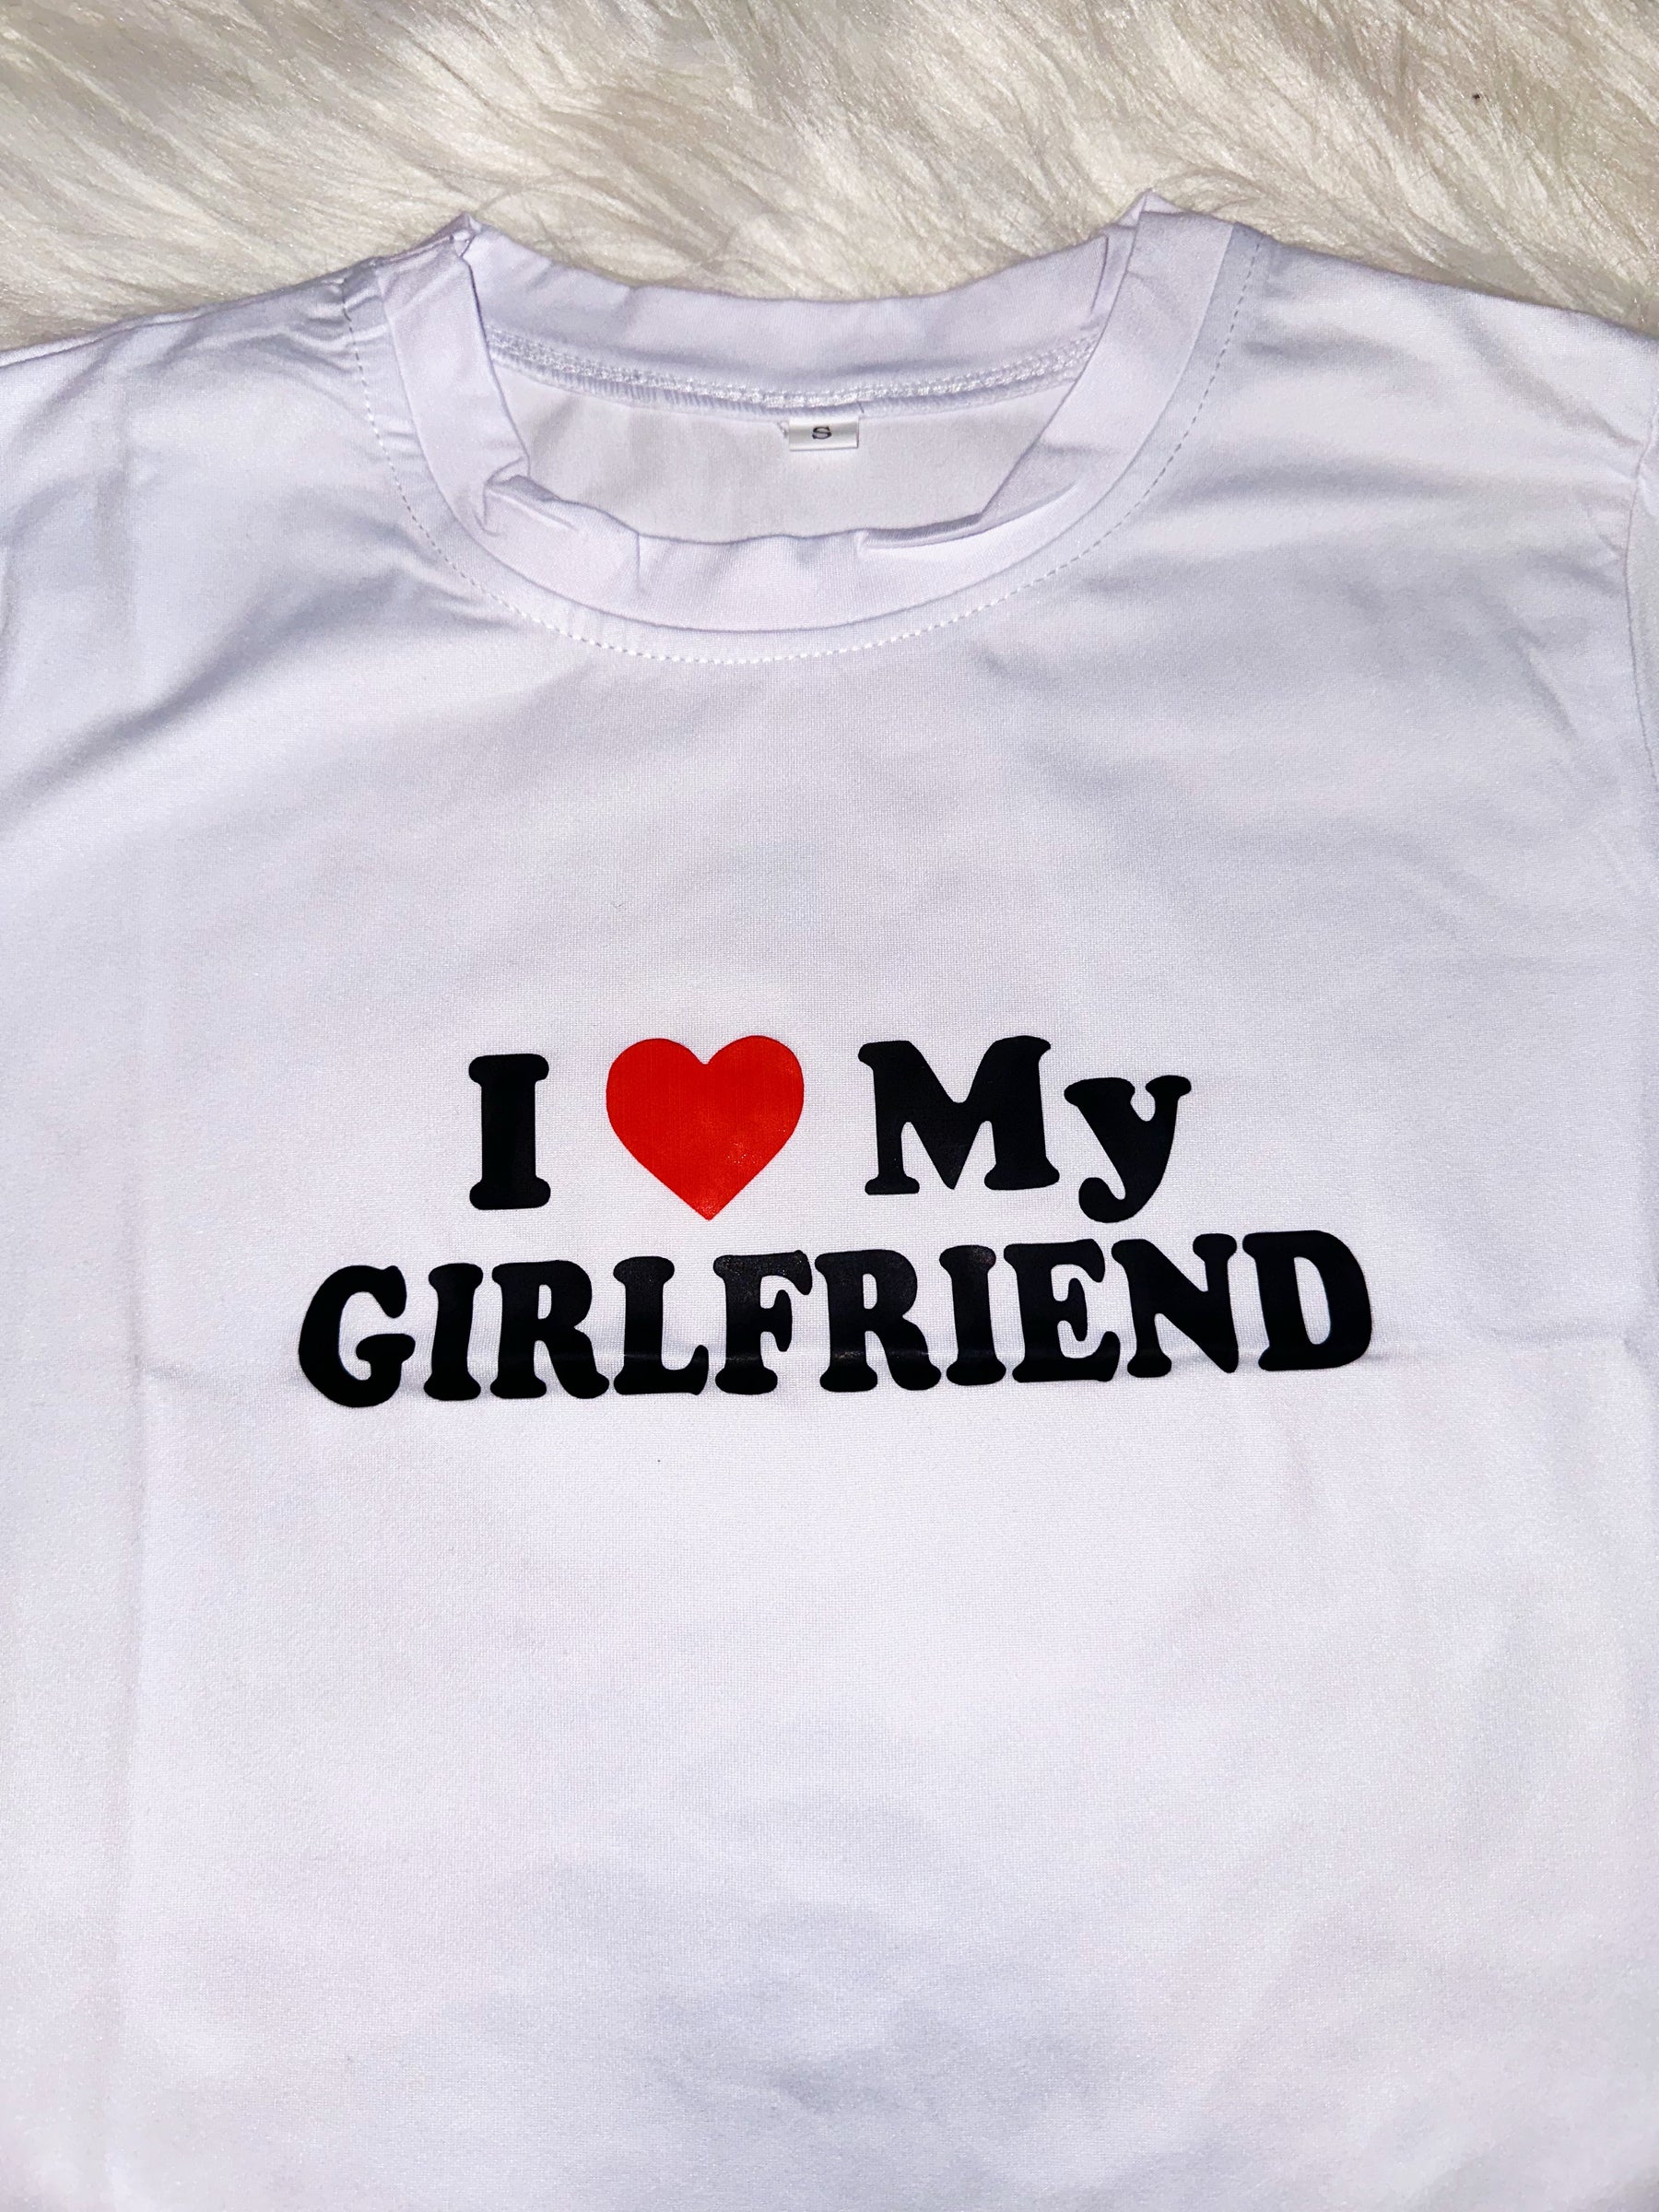 Girlfriend Baby Tee - ONFEMME By Lindsey's Kloset